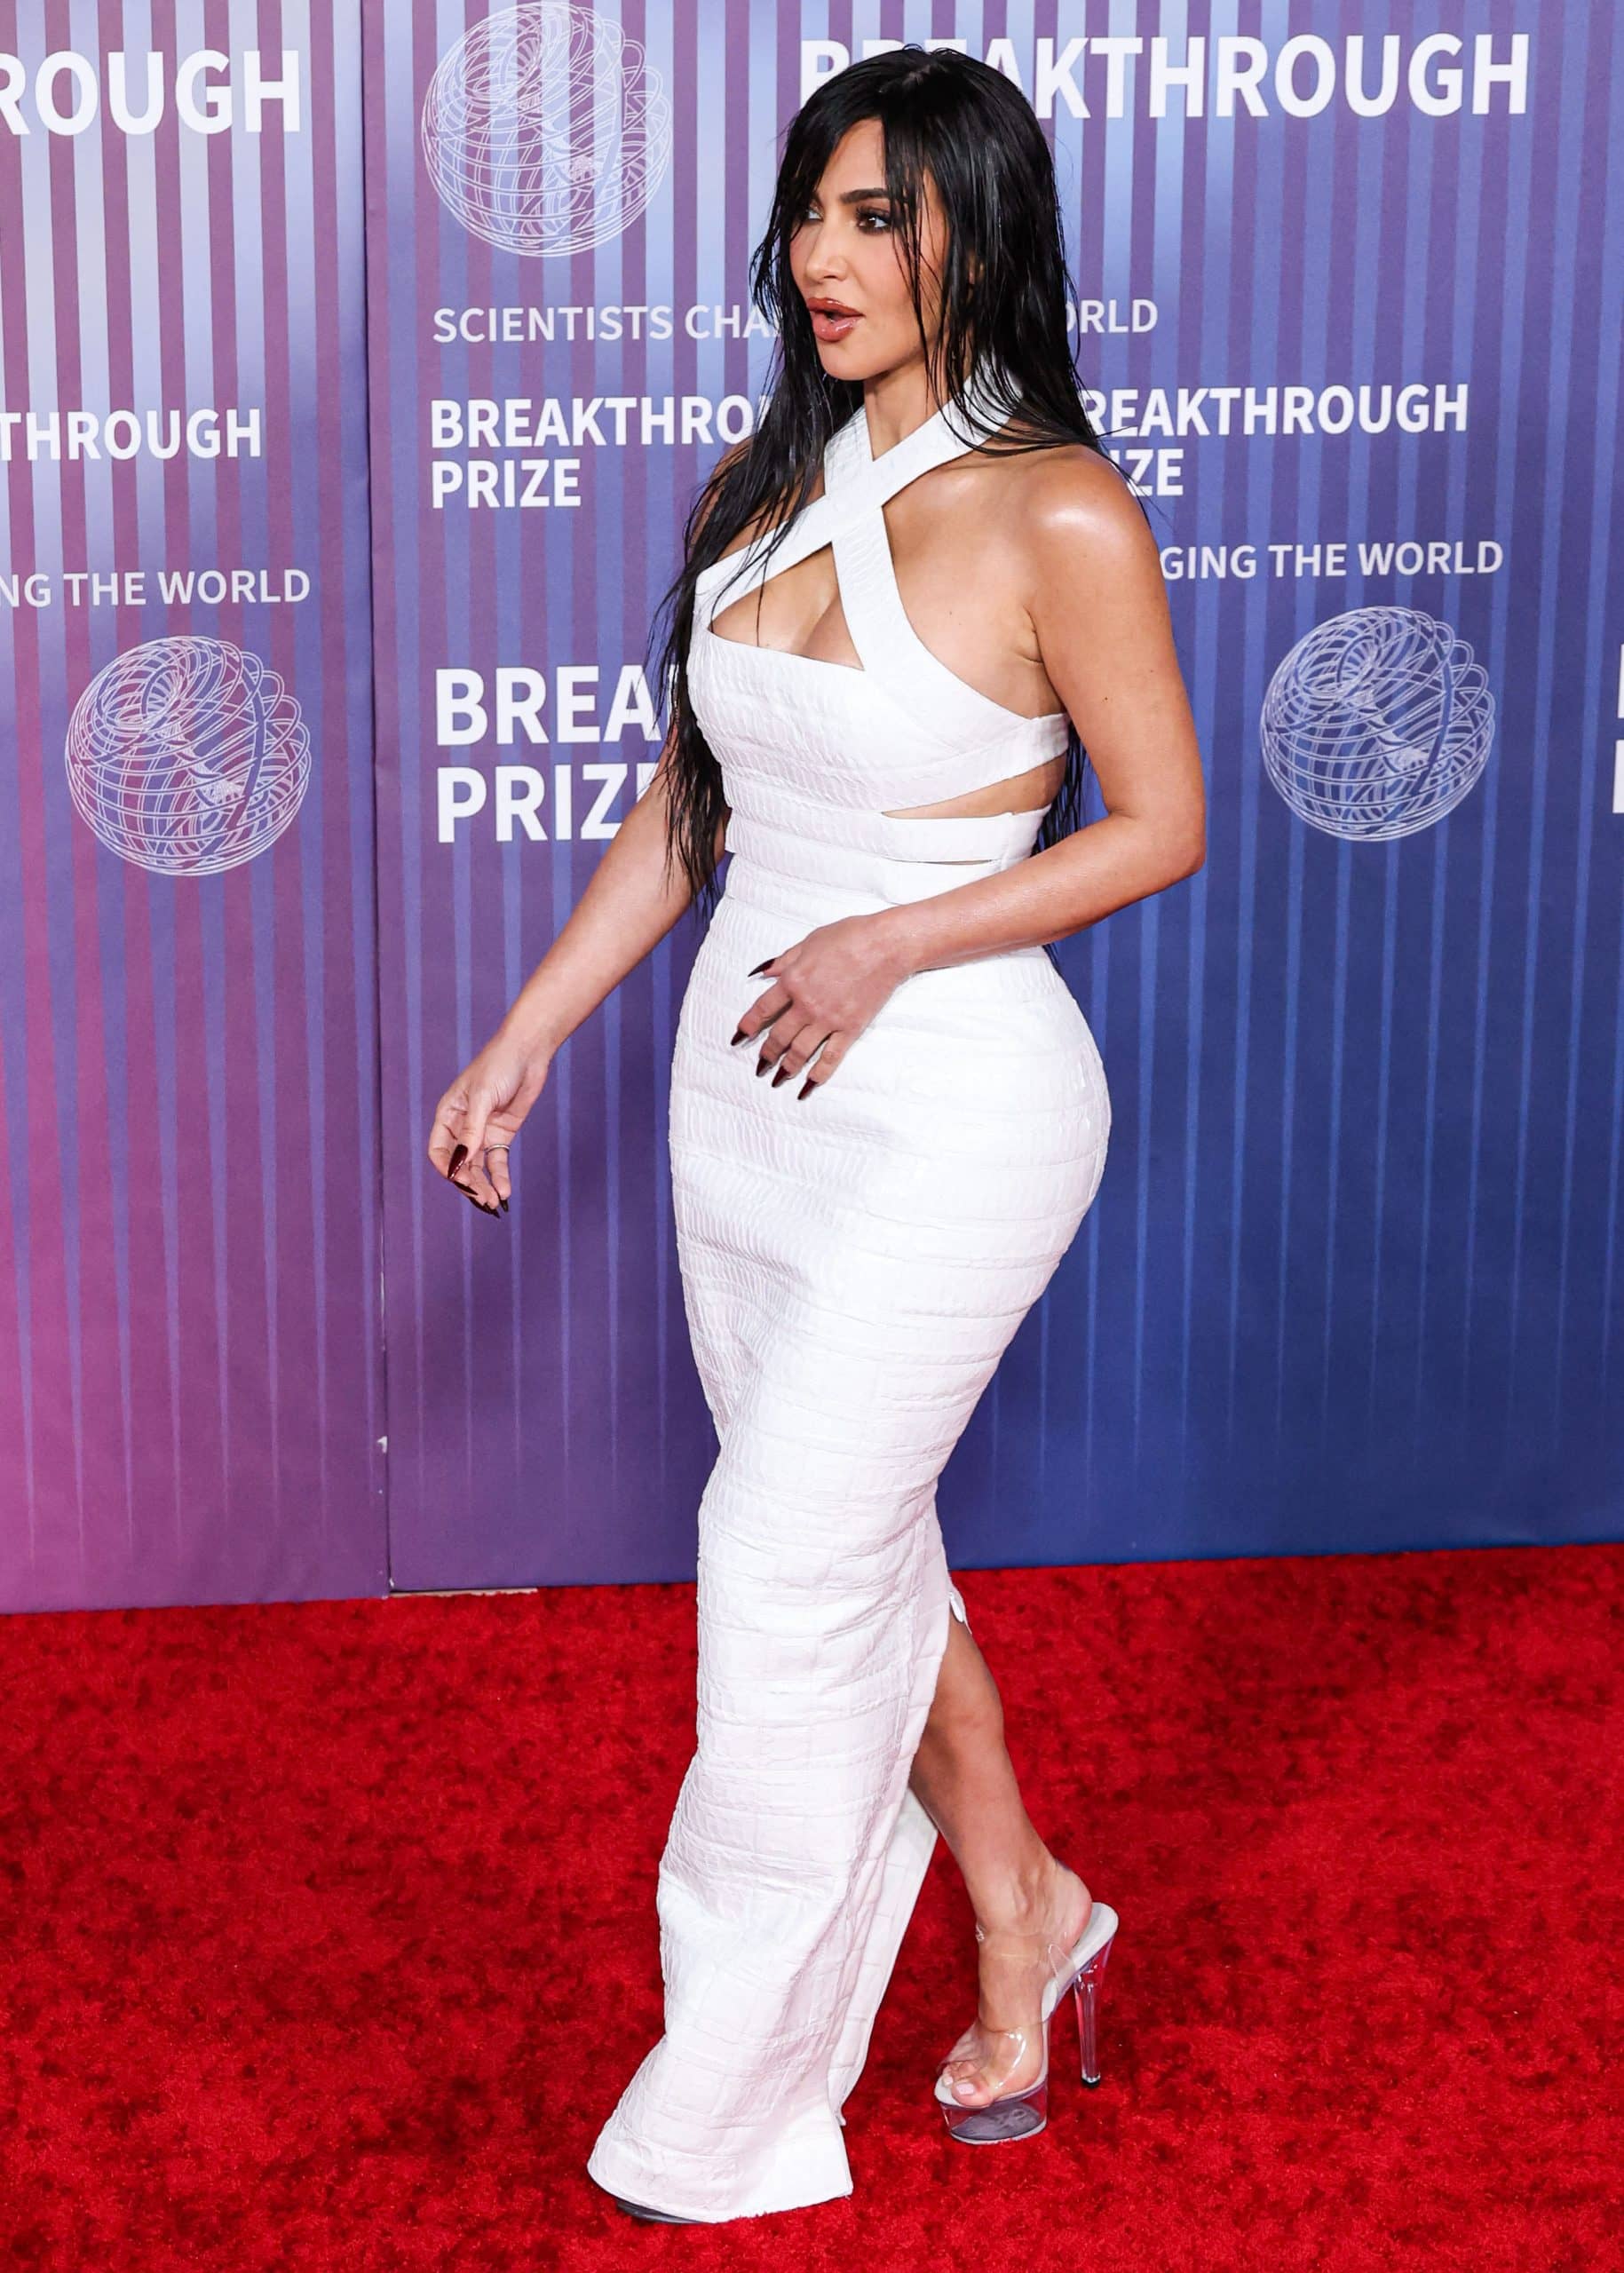 Kim Kardashian's white croc leather dress features a halterneck, a boob window, and sexy side slits and cutouts